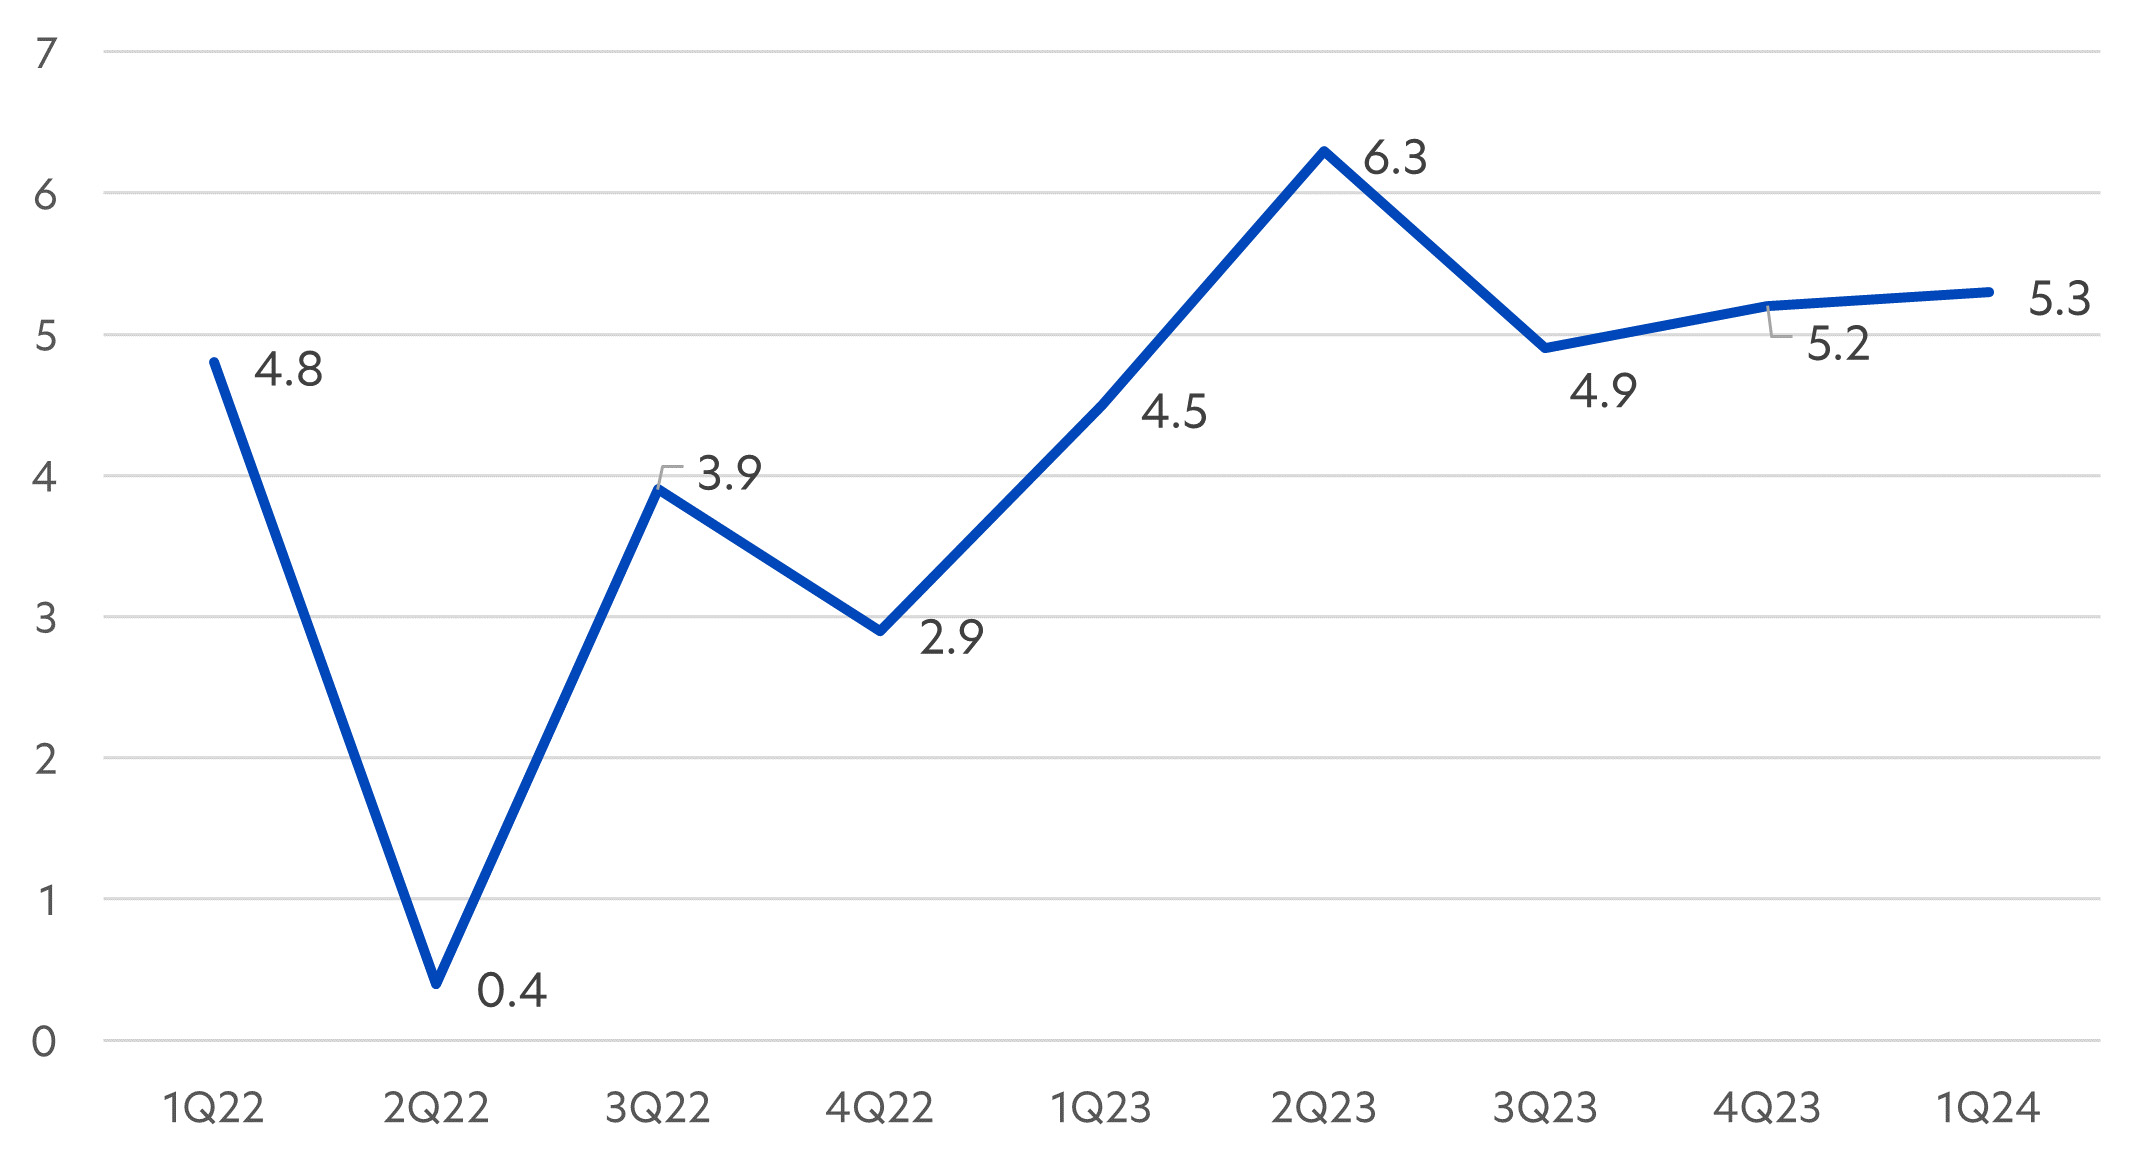 Figure 2: China GDP year on year growth